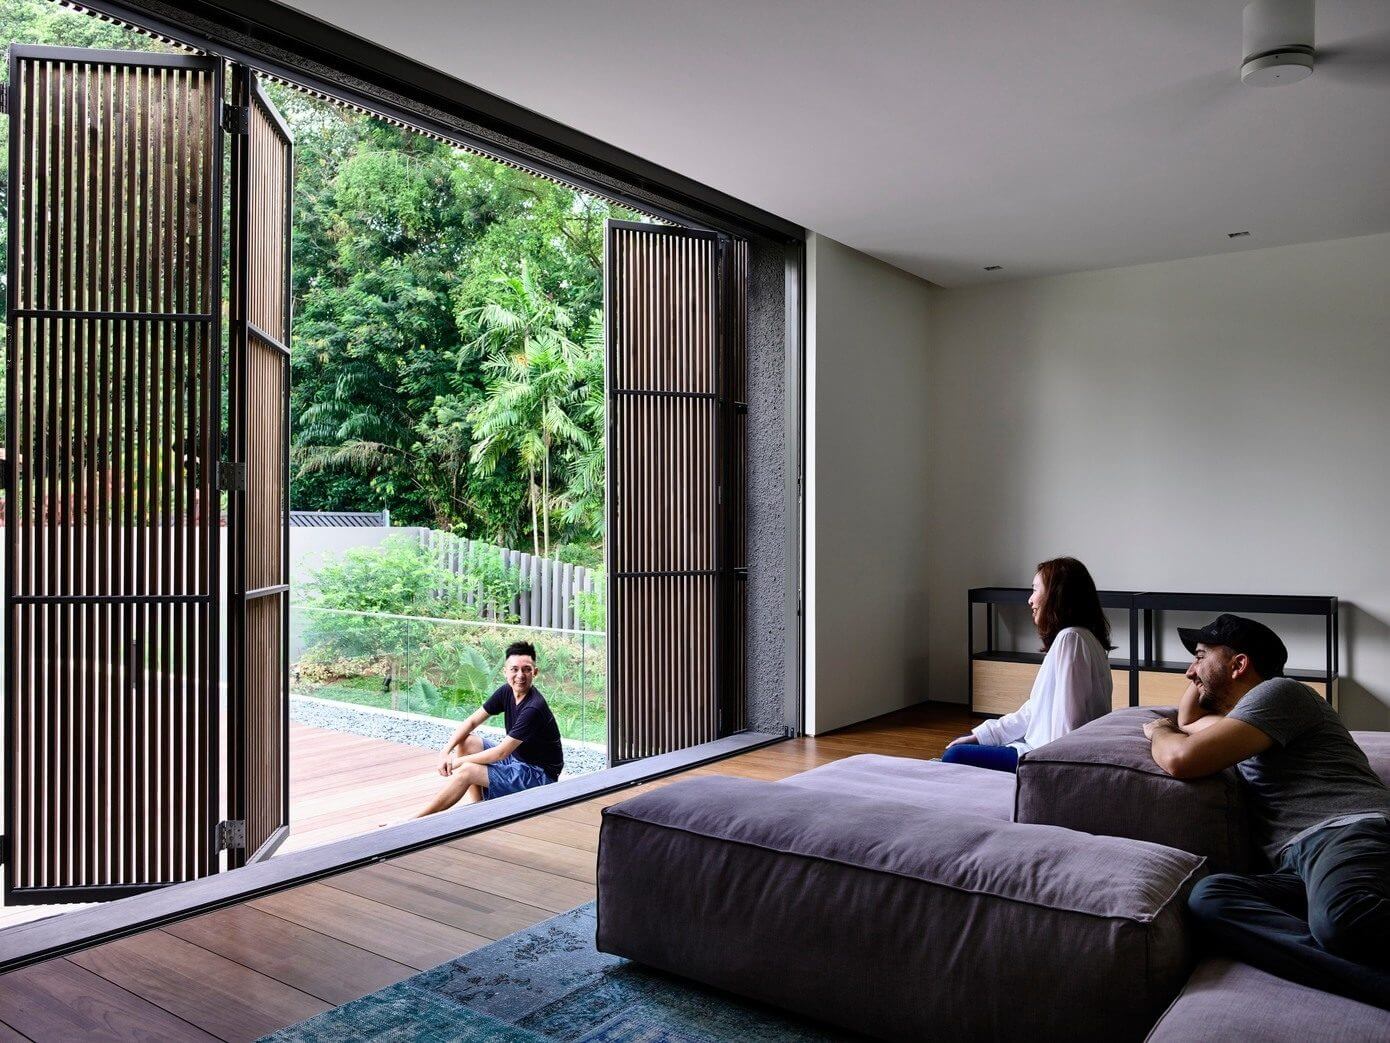 KAP-House by ONG&ONG